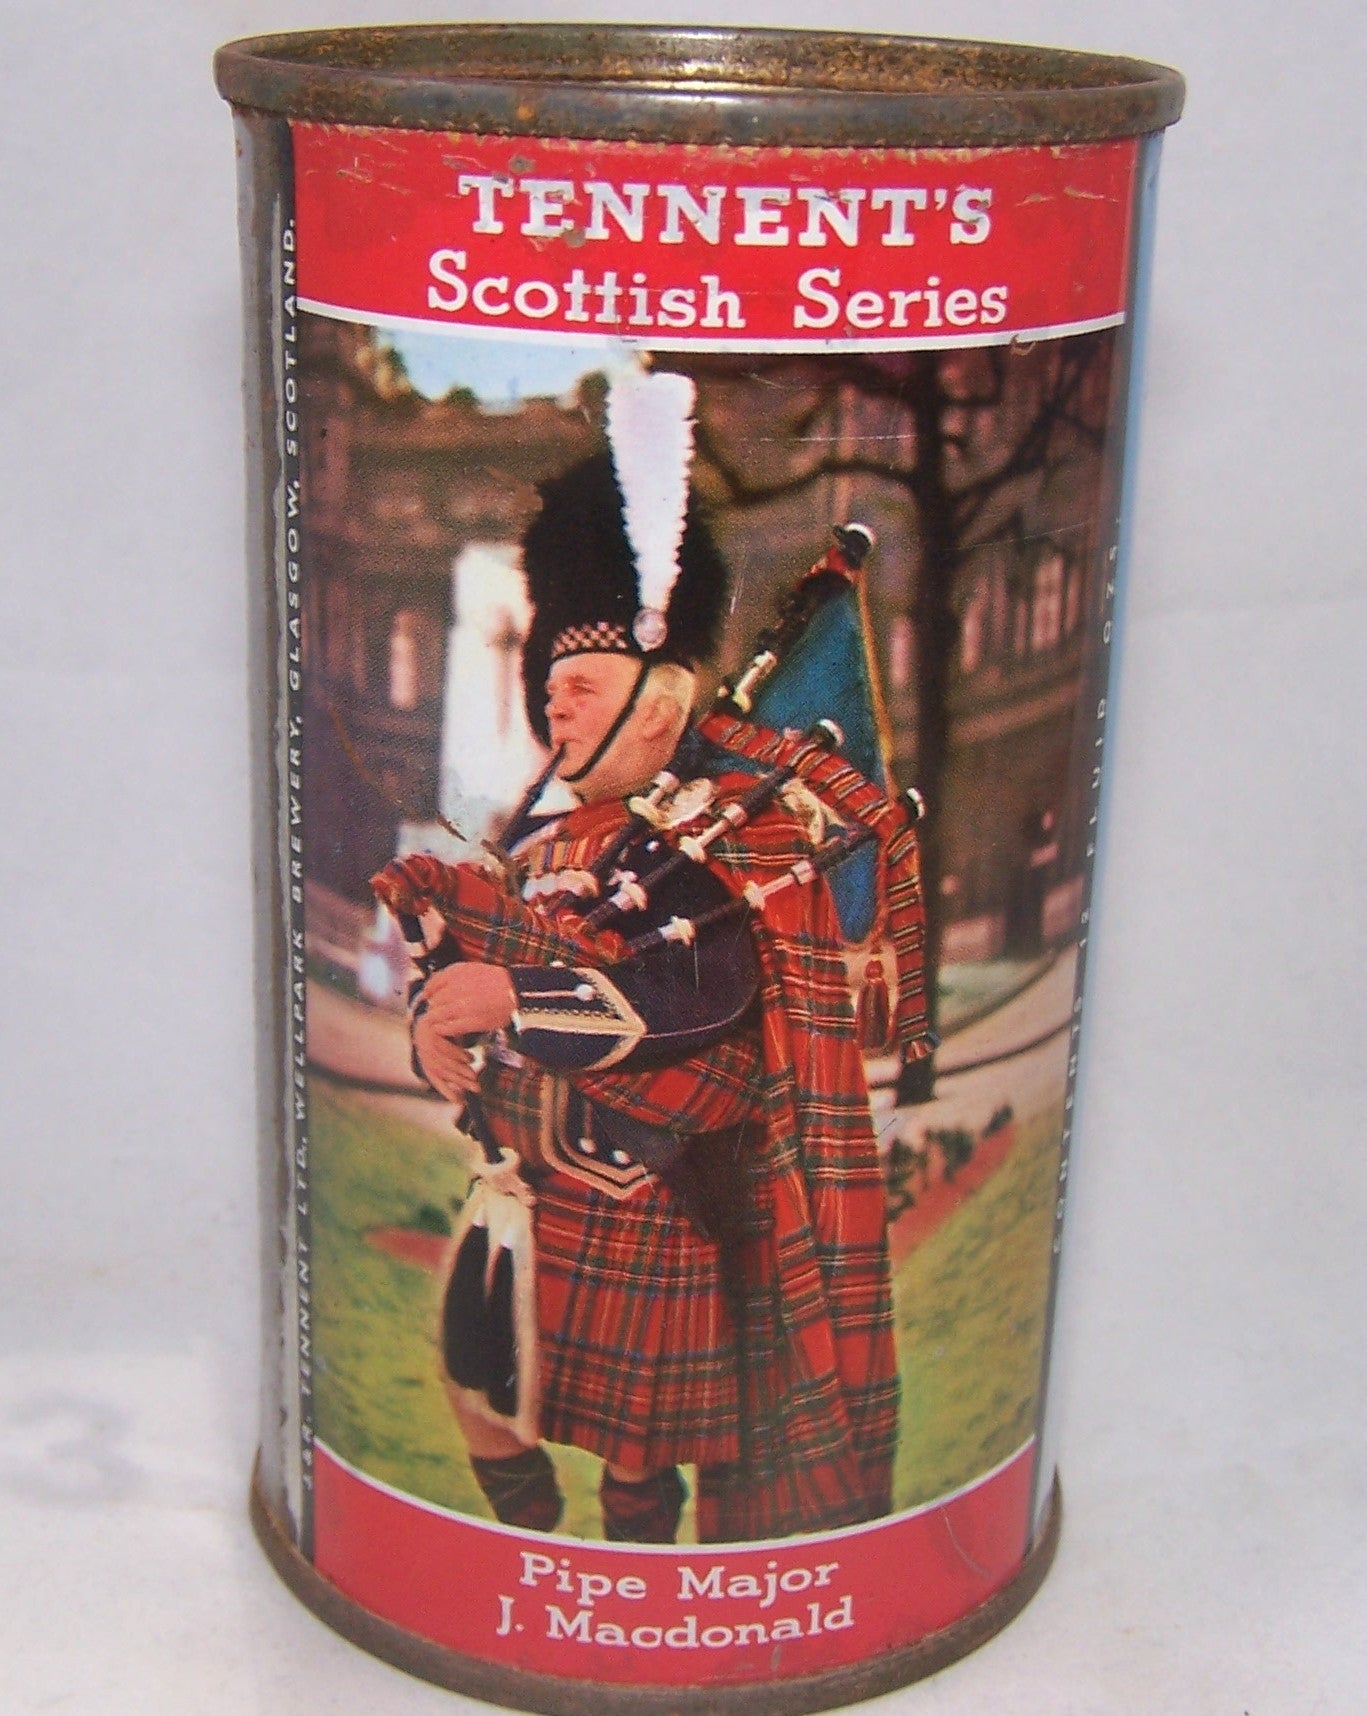 Tennent's Lager Scottish Series, (Pipe Major) Grade 1- Sold on 06/02/17